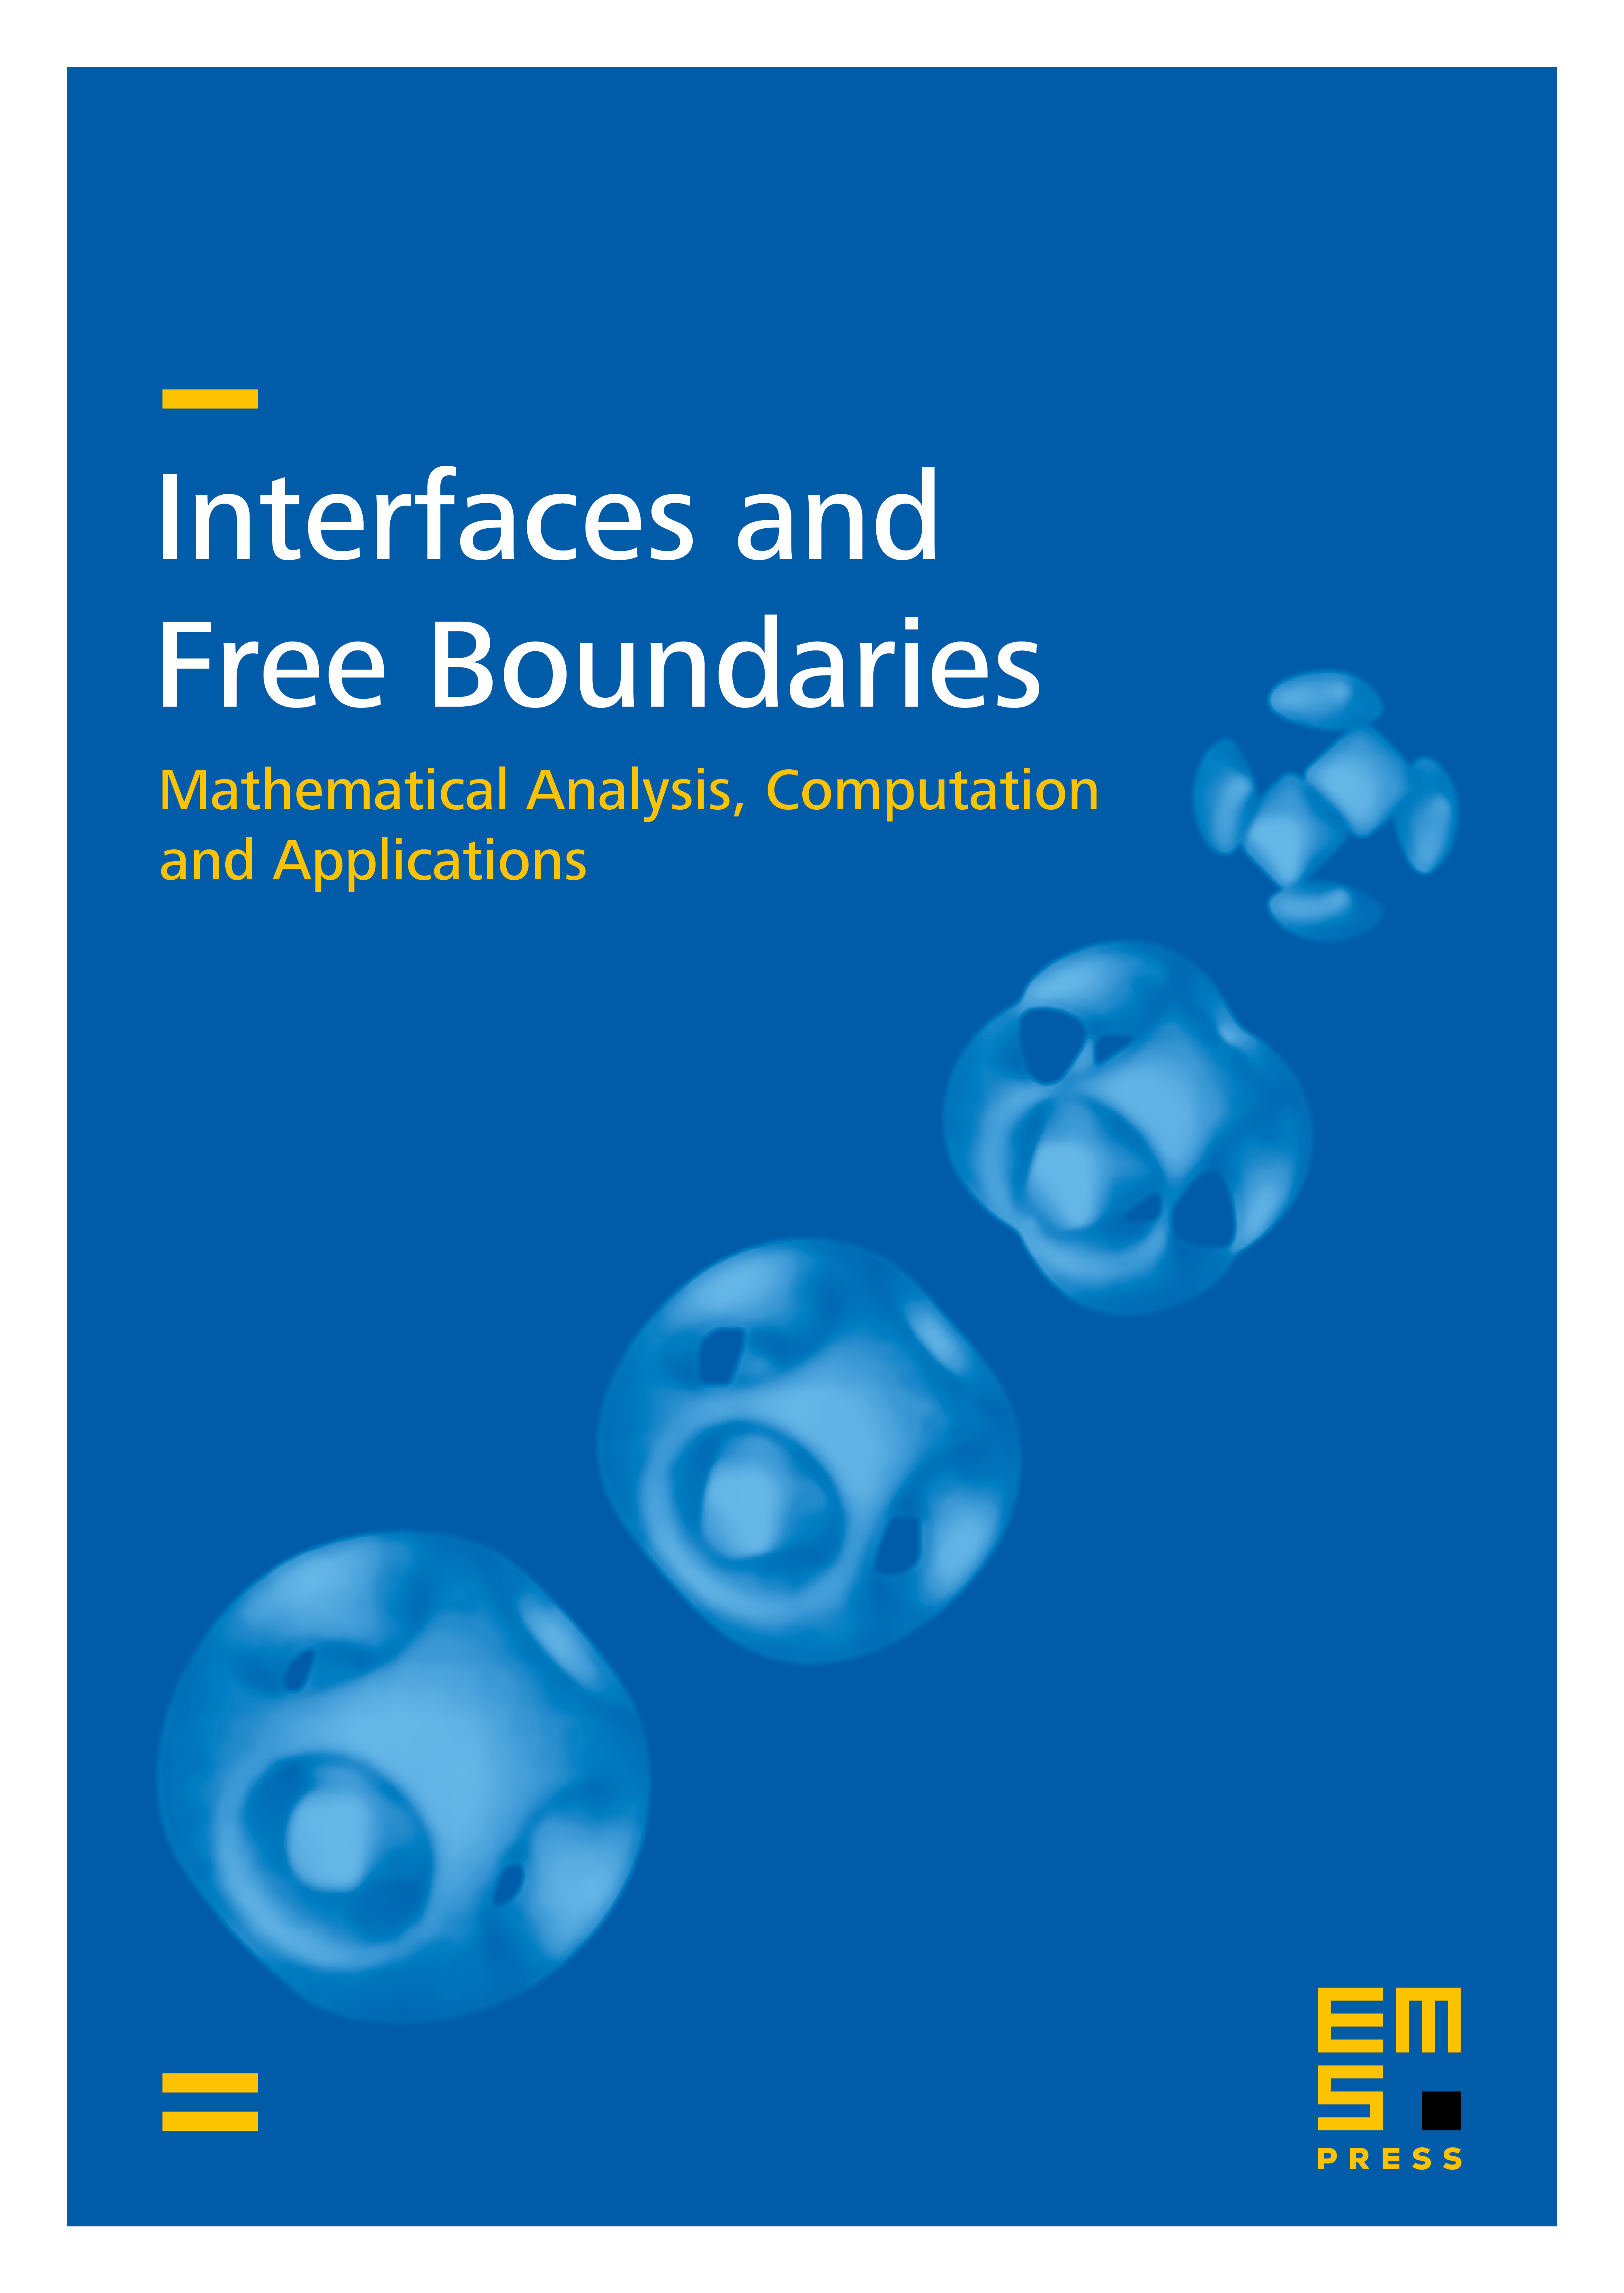 On the Bernoulli free boundary problem and related shape optimization problems cover